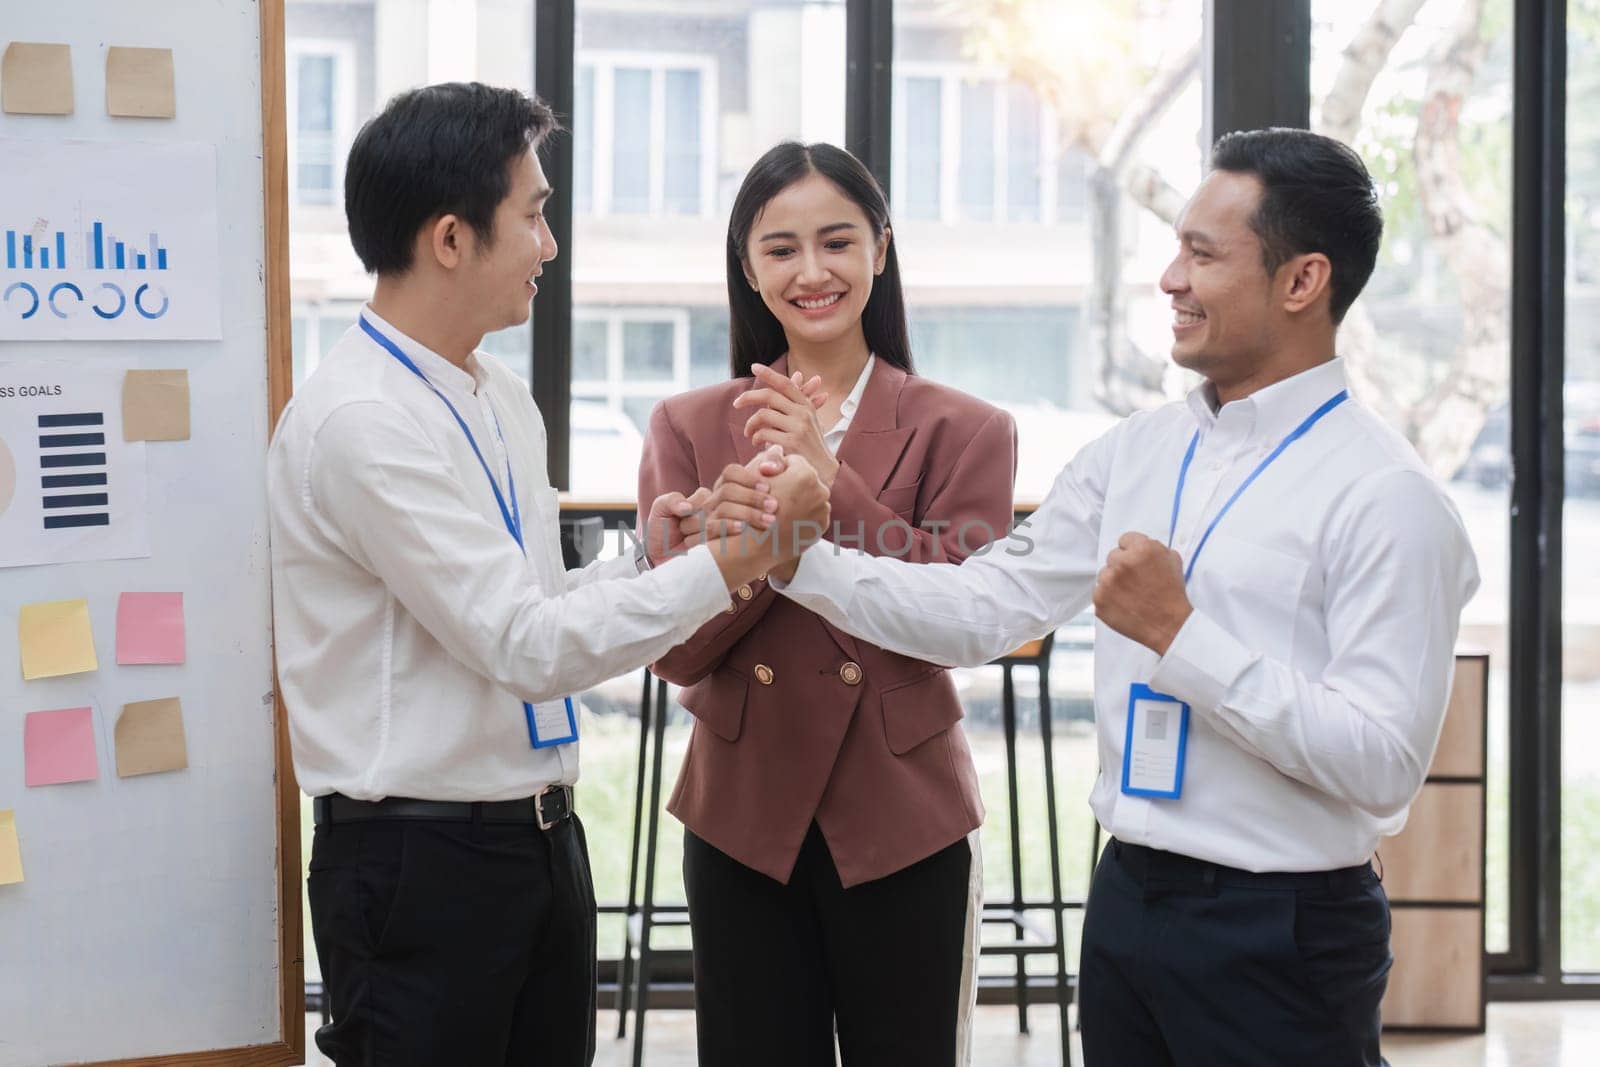 Professional businessmen shake hands to congratulate after business success..